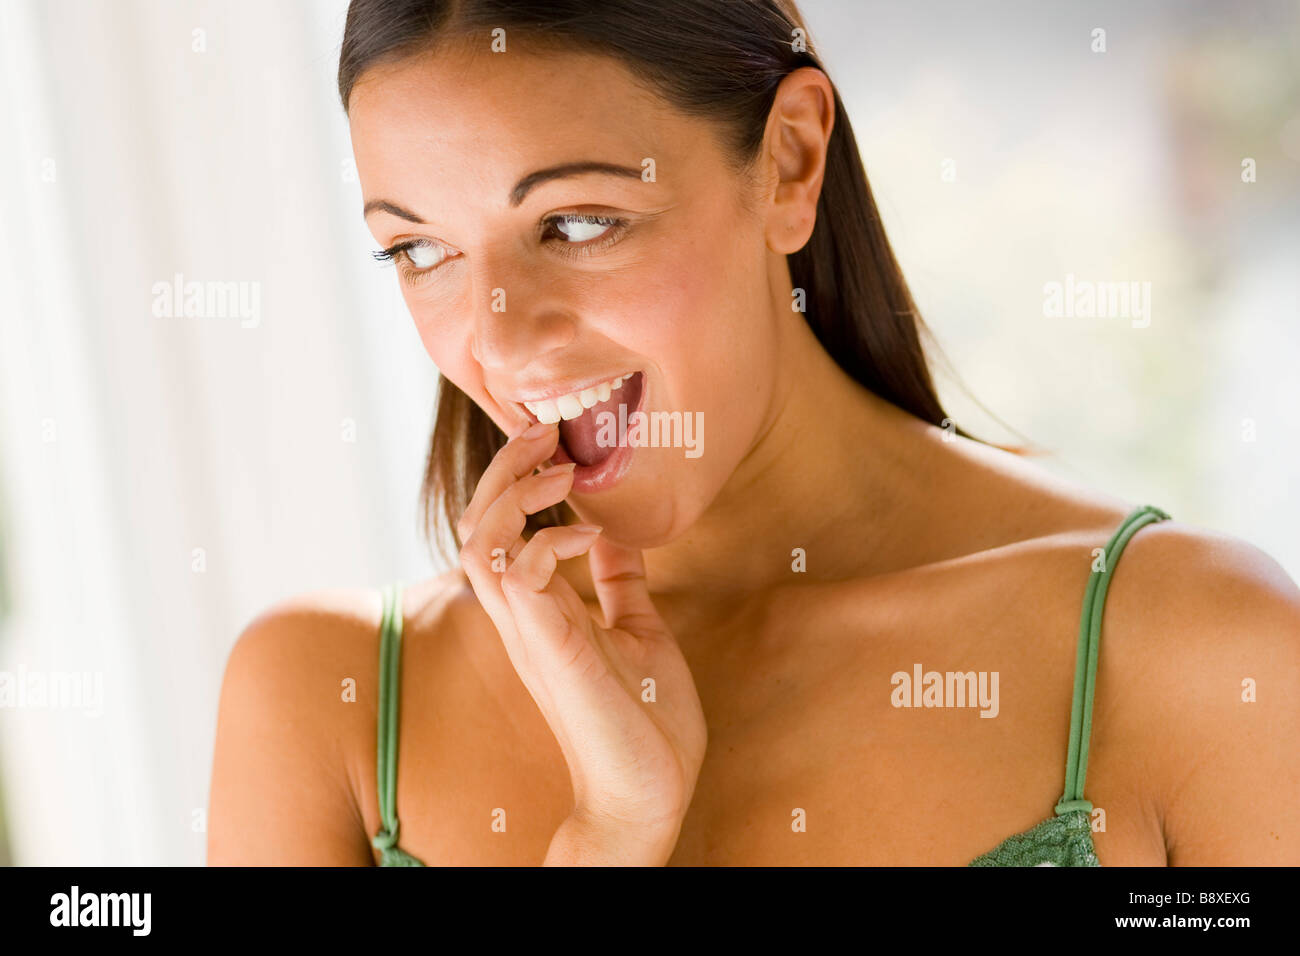 Portrait of pretty smiling teenager Stock Photo